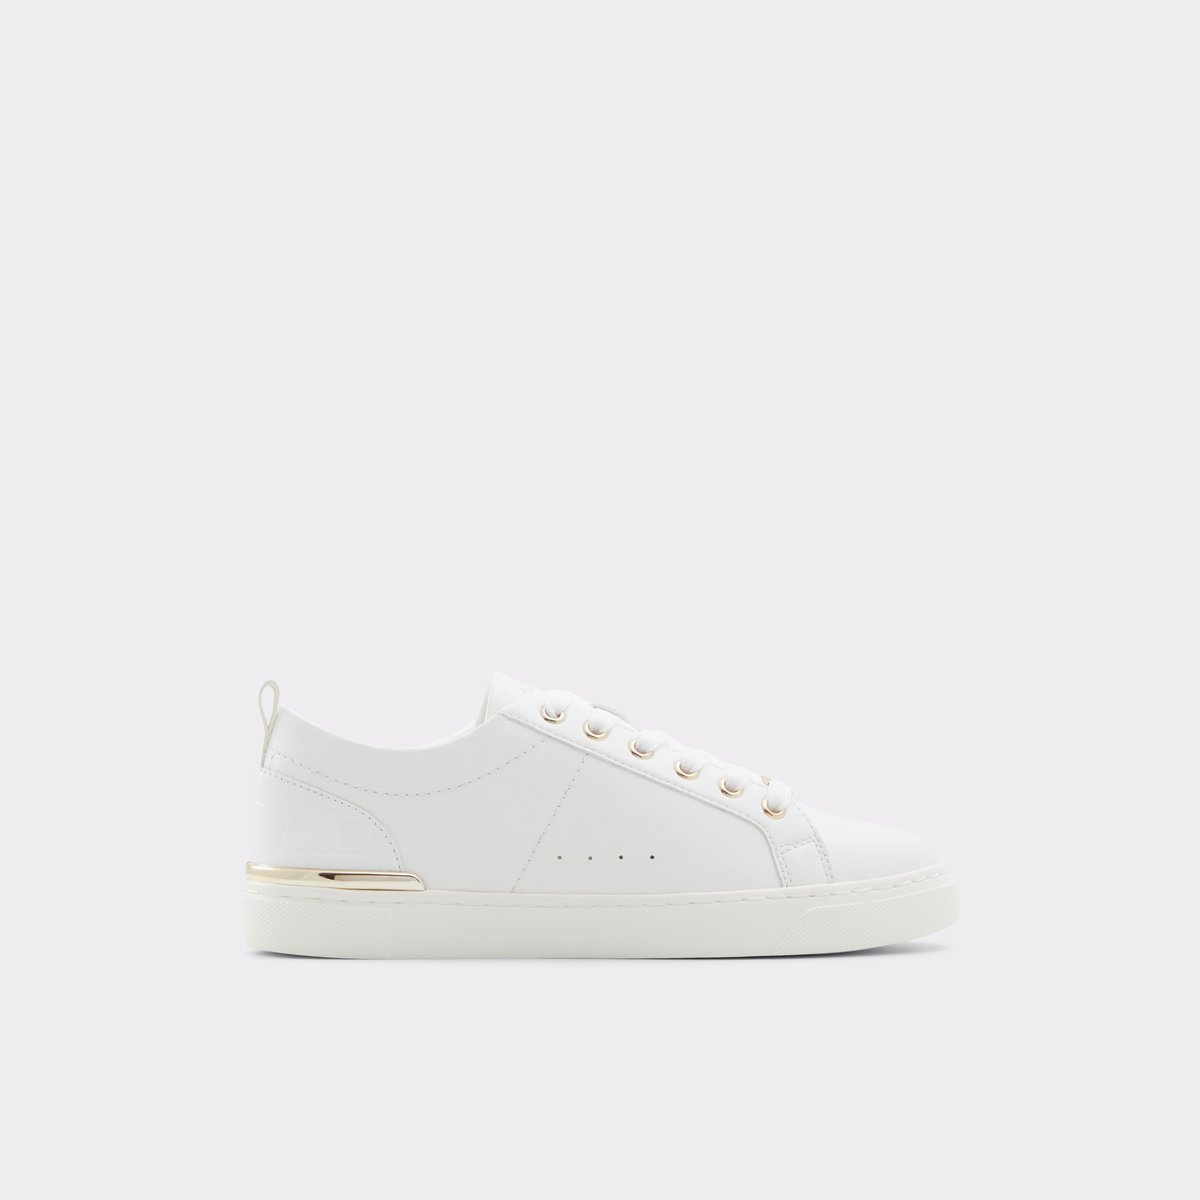 Aldo Studded Love Lace Up Sneakers In White - Fancy Soles